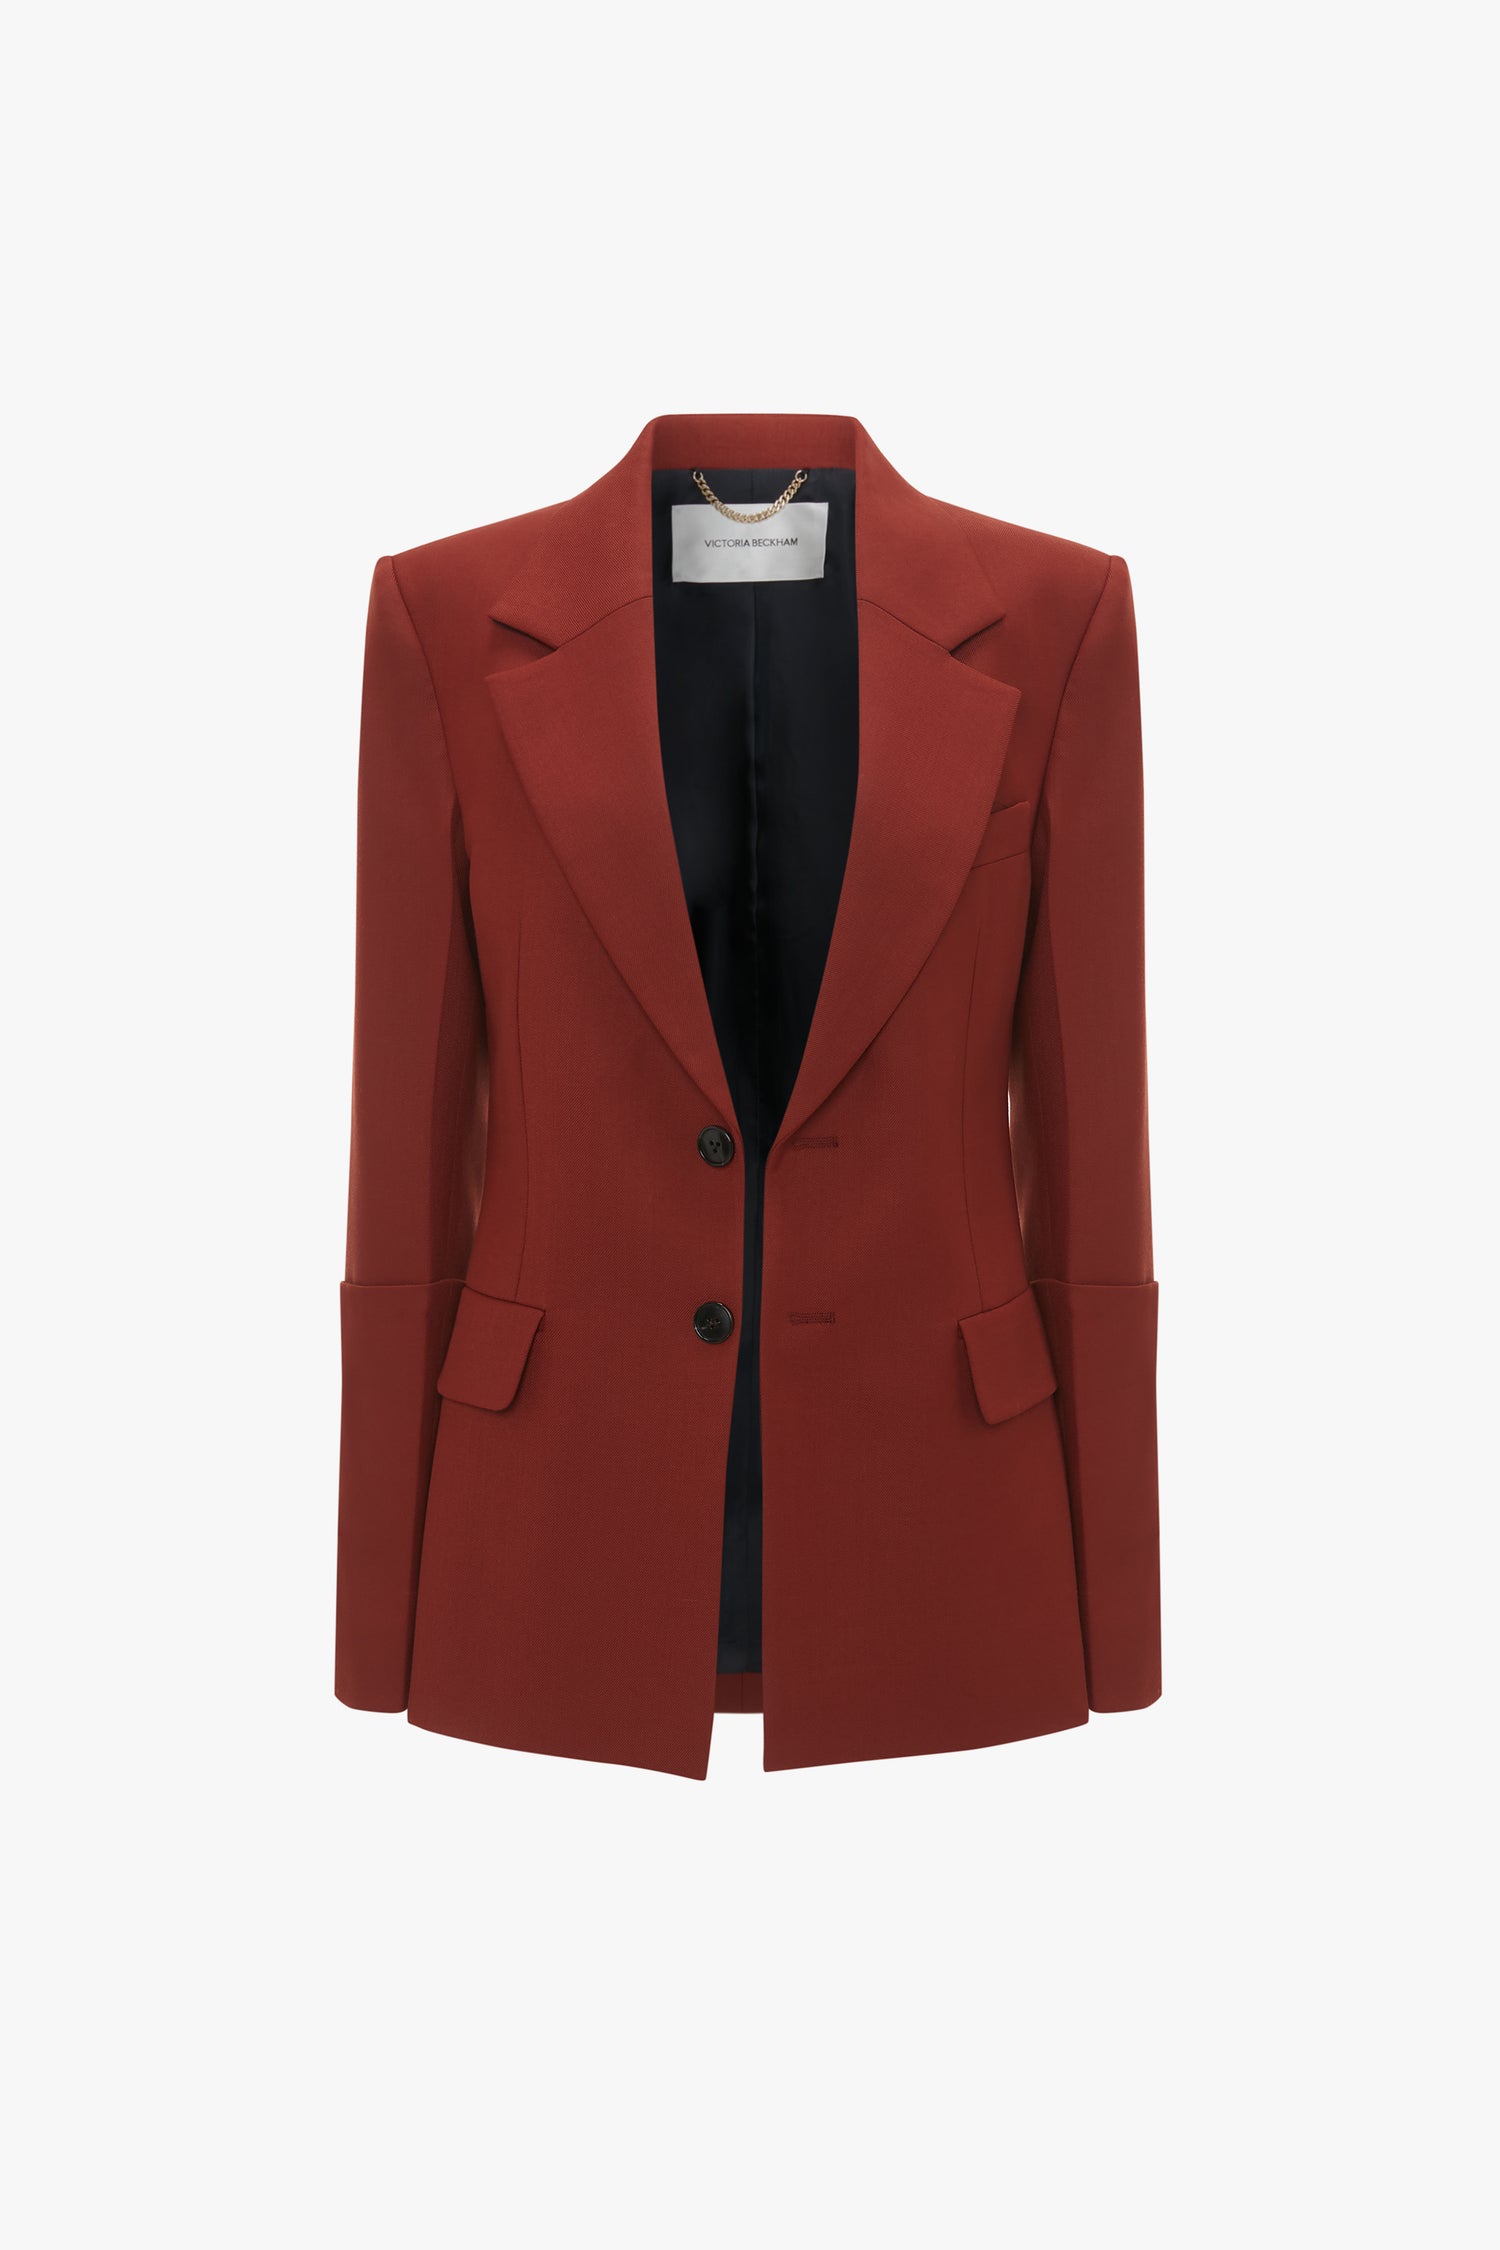 A tailored, deep red Sleeve Detail Patch Pocket Jacket In Russet by Victoria Beckham with two buttons and notched lapels. It features contemporary detailing with two front pockets with flaps and has a minimalist design.